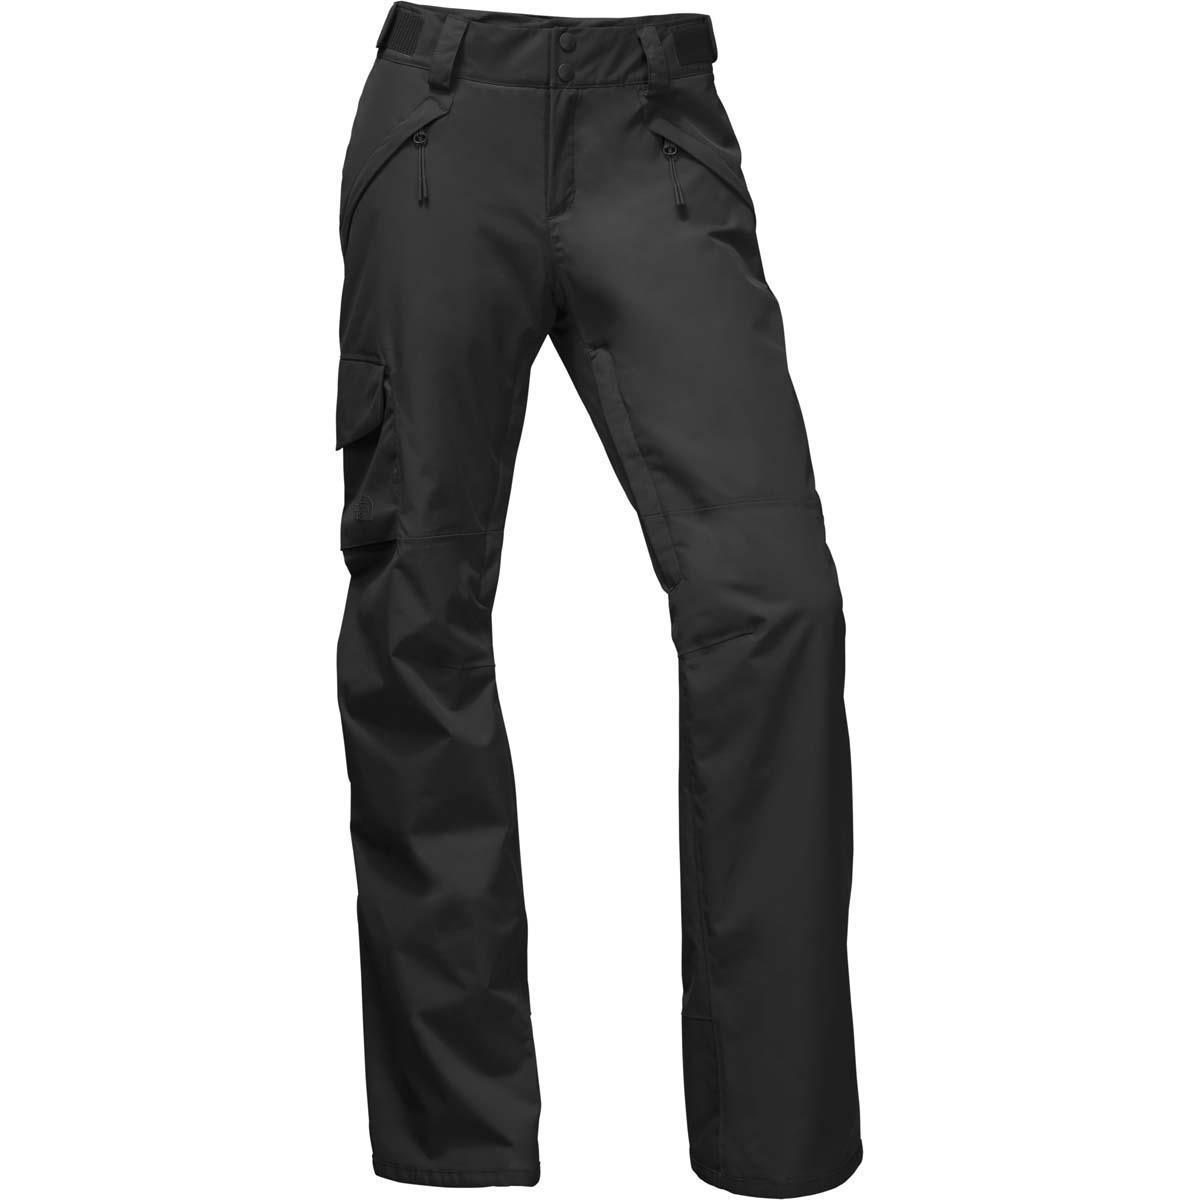 The North Face Women's Freedom Insulated Pant - 2018 model